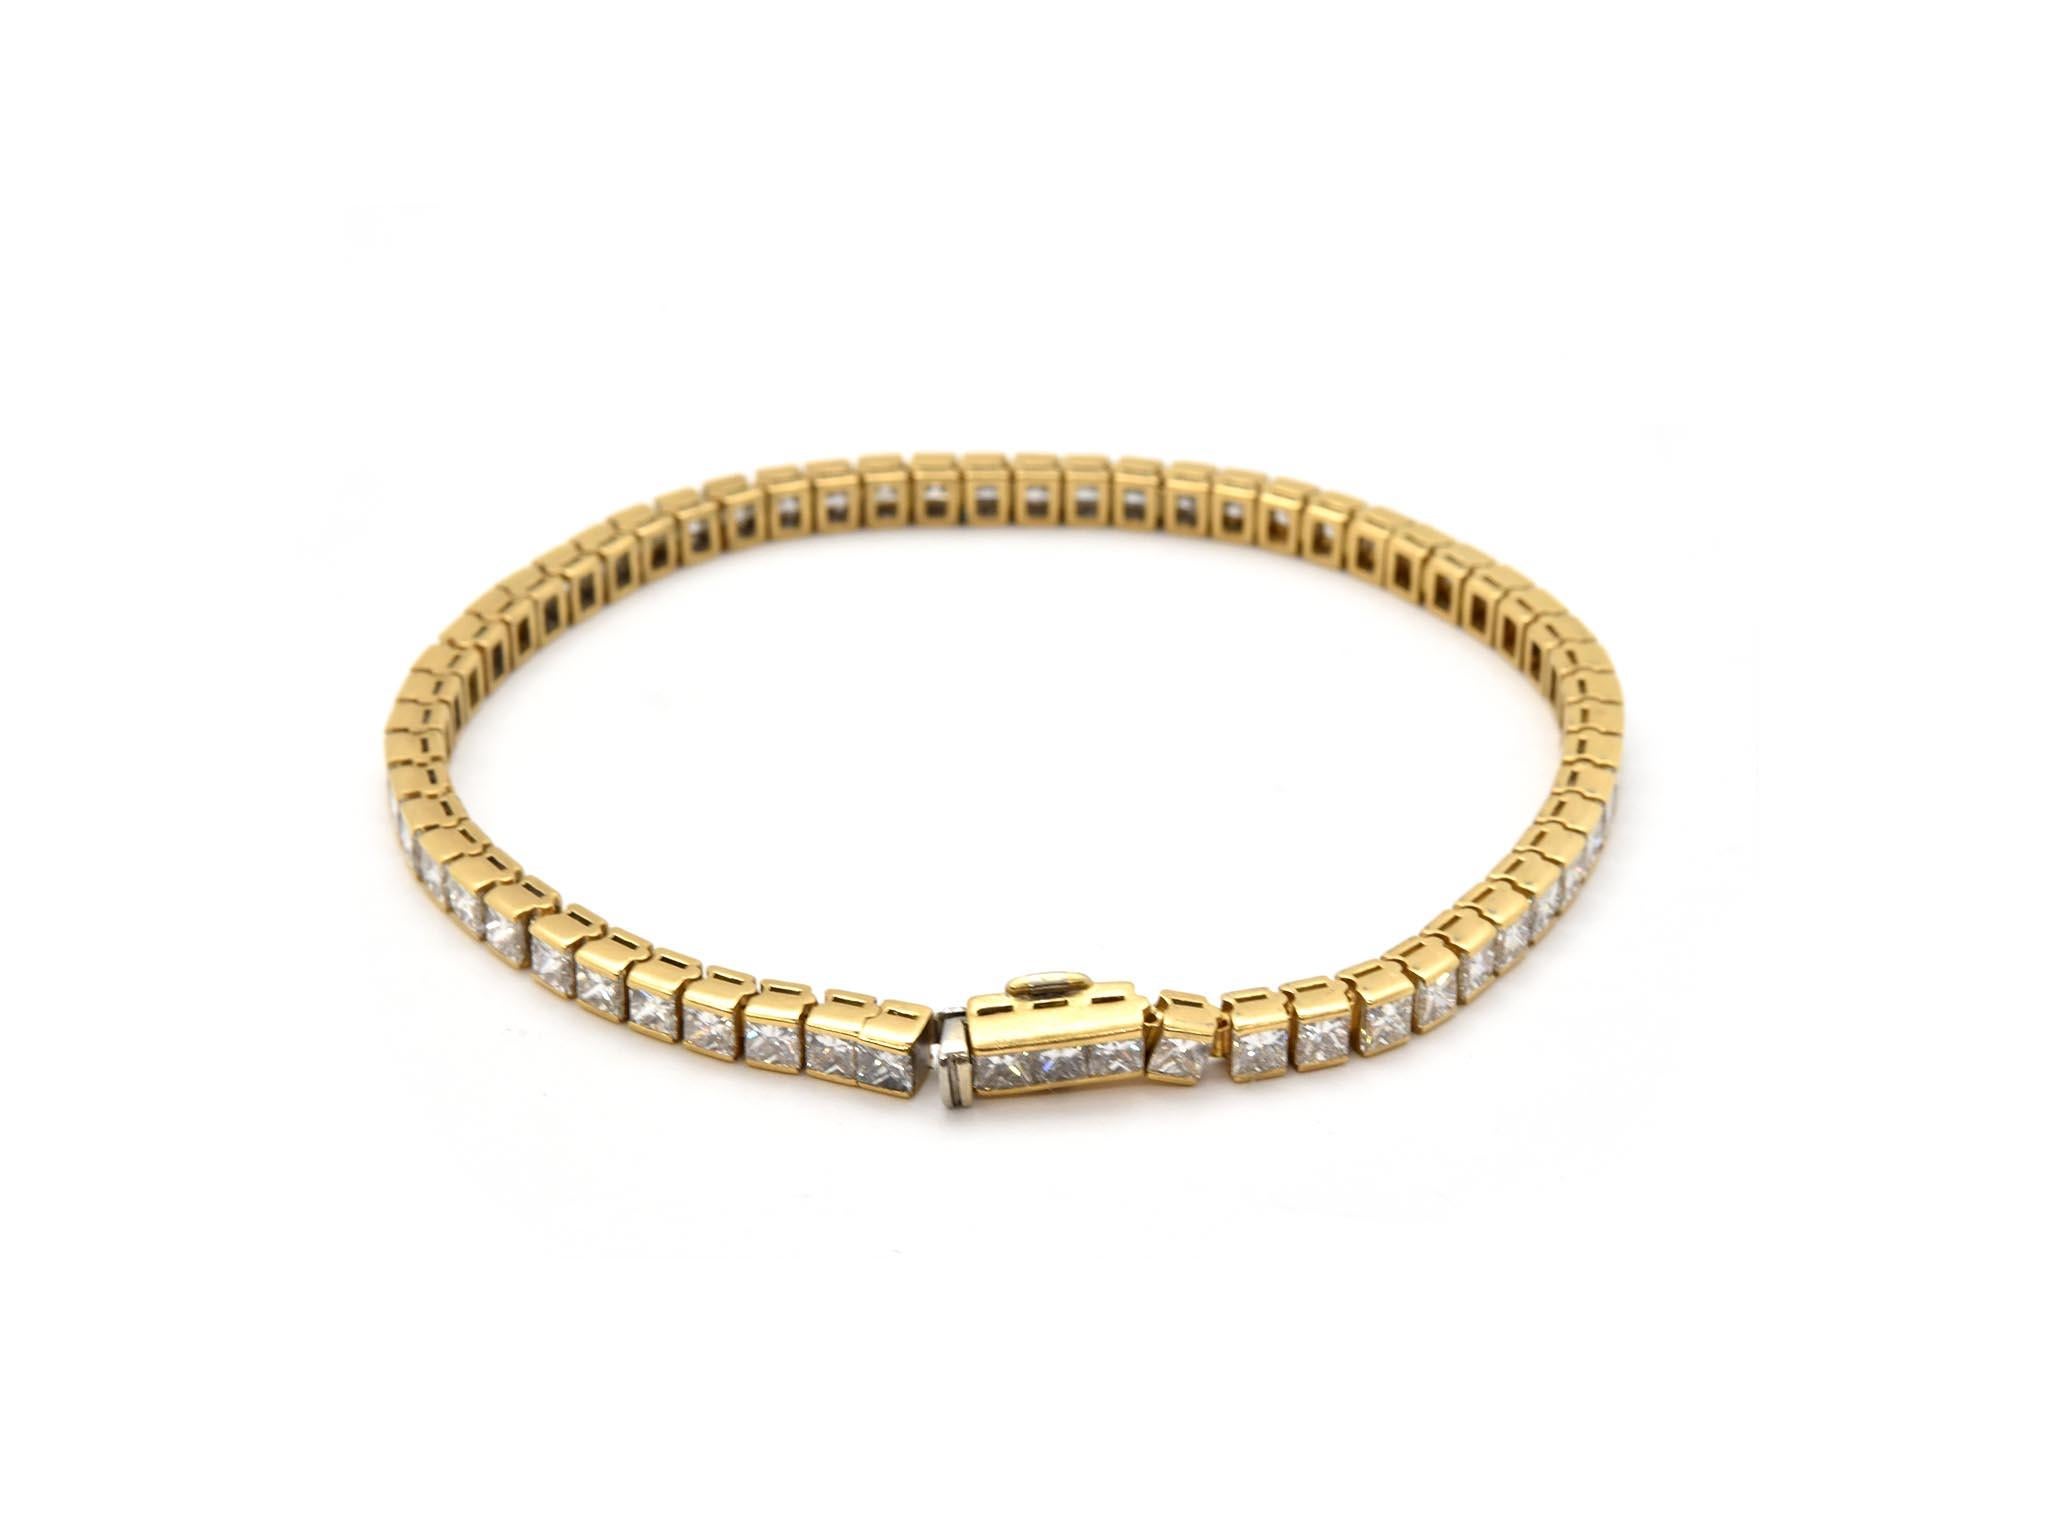 Sixty white princess cut diamonds are placed across the entire face of this exquisite inline bracelet. Crafted in 18k yellow gold, diamonds on this bracelet reach 7.20 carats and are graded: G-H in color and VS in clarity. This bracelet will fit up